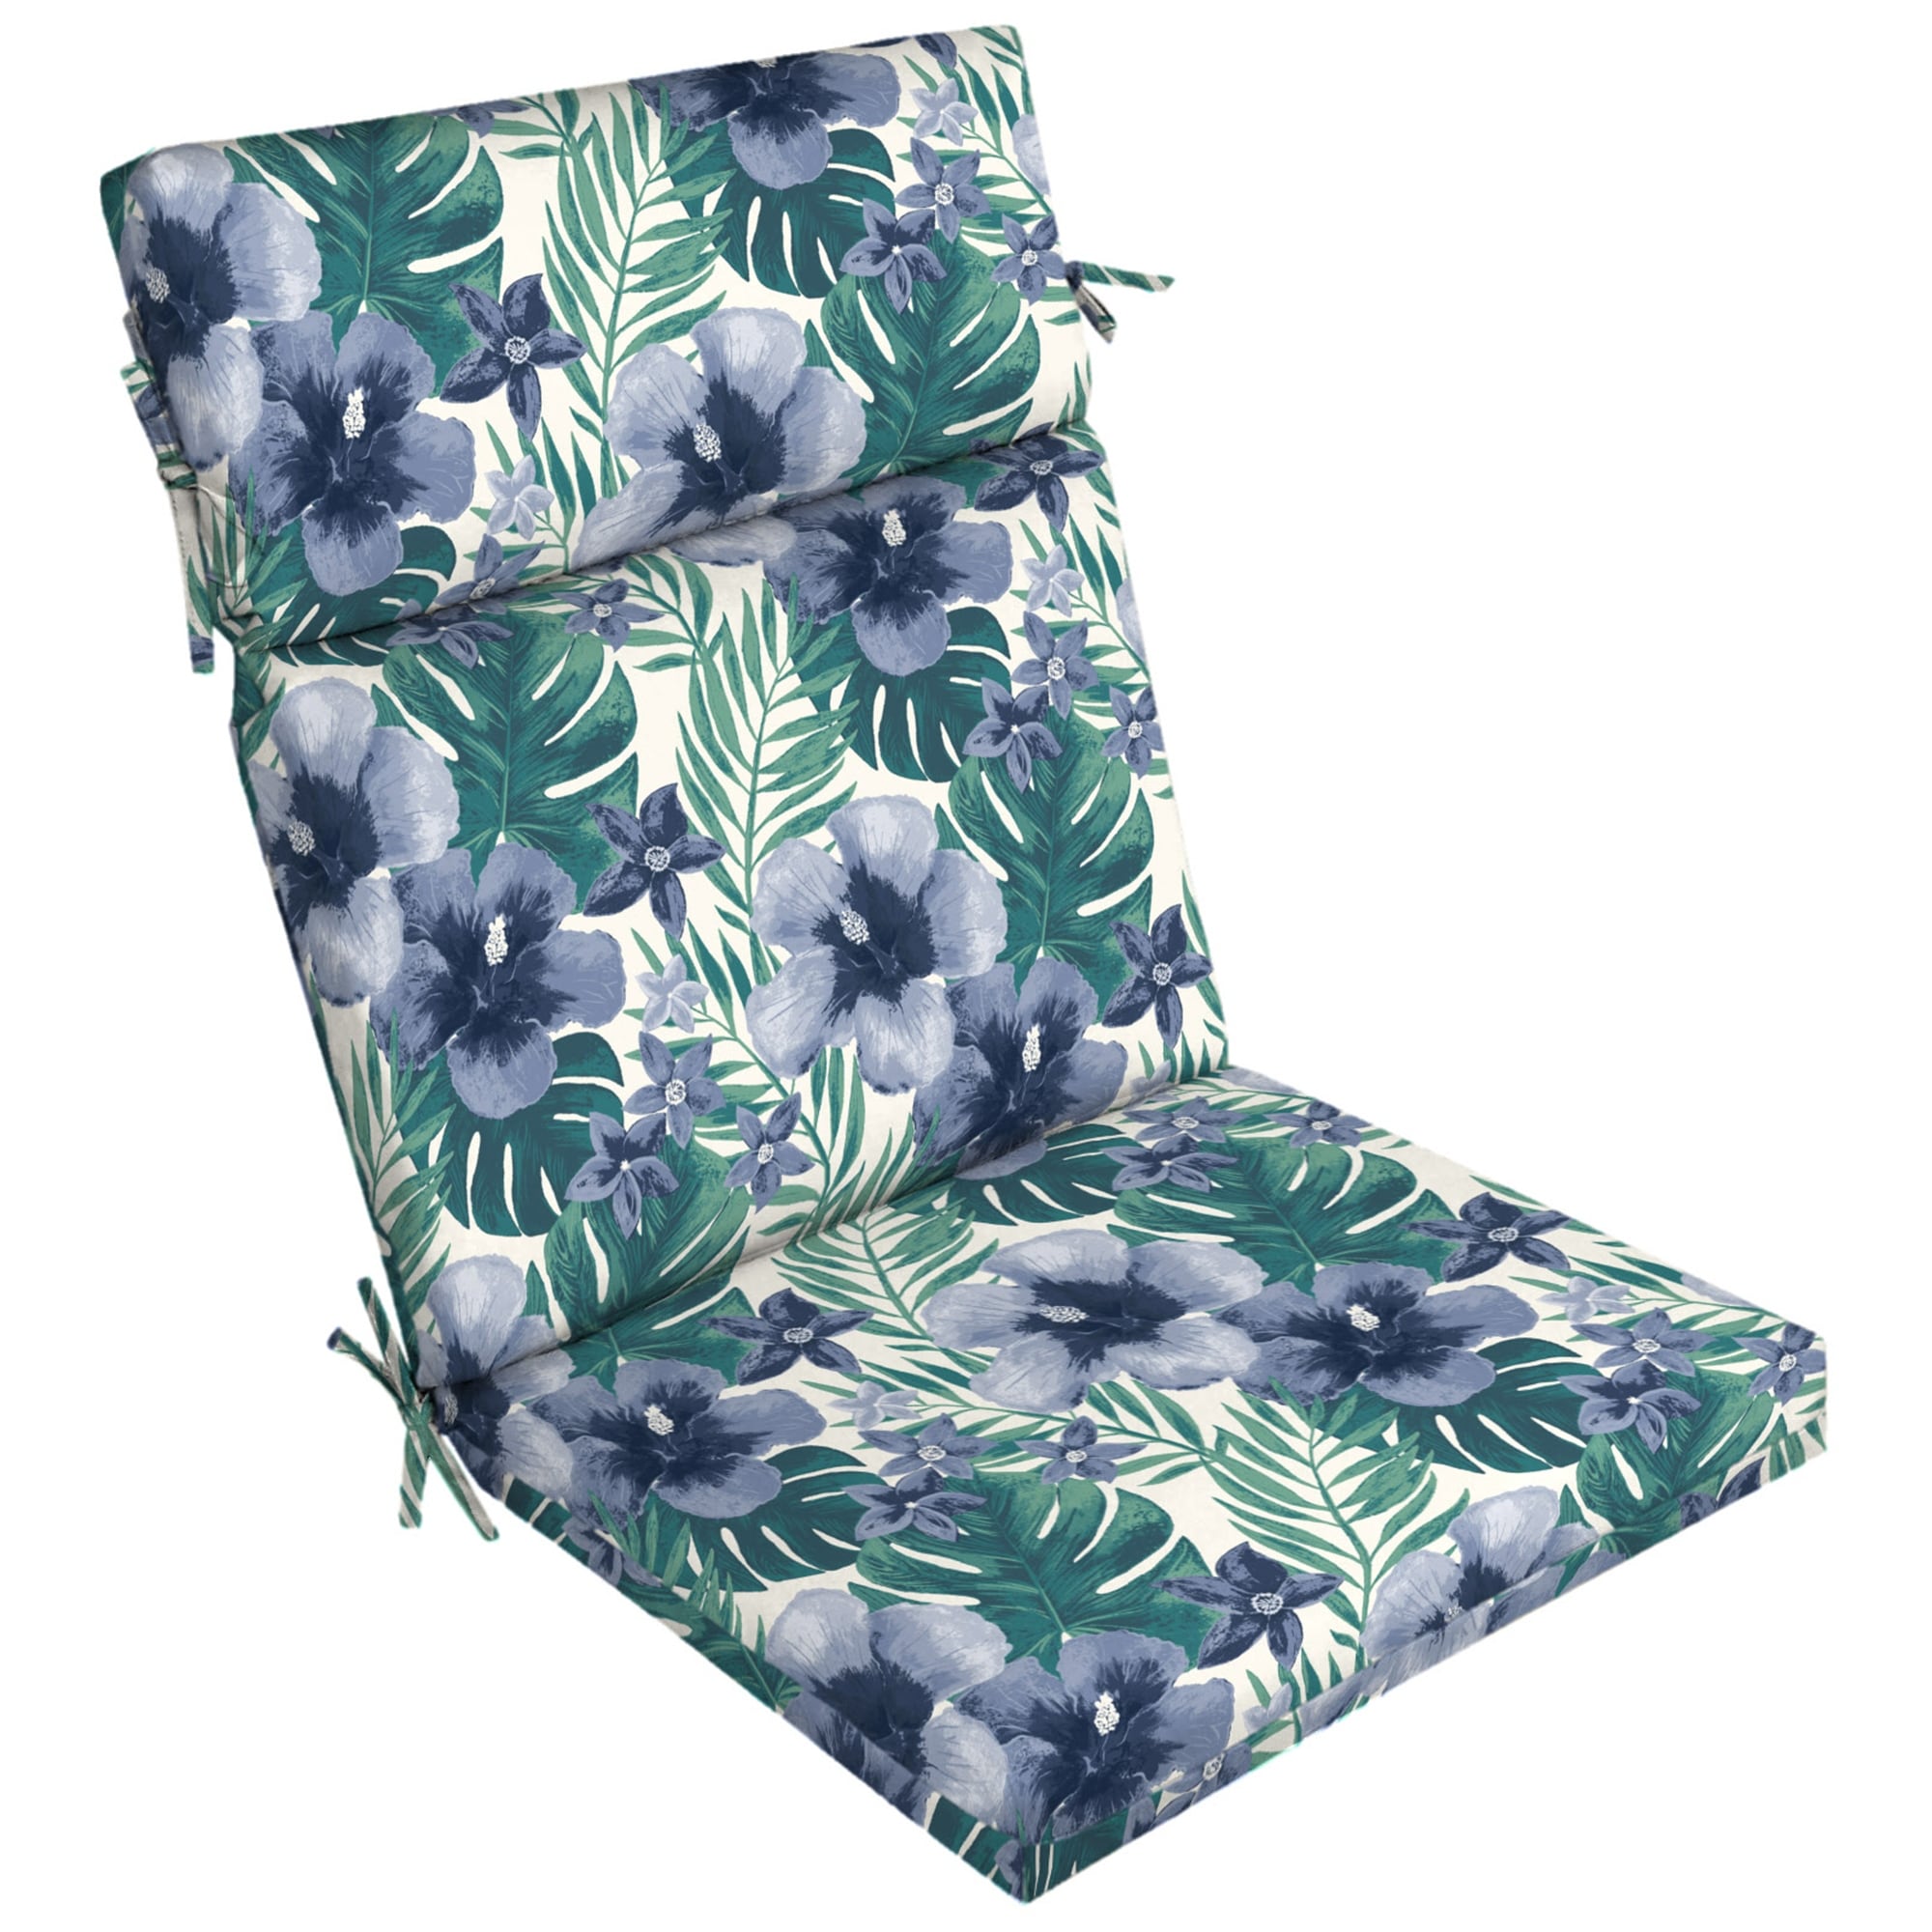 https://ak1.ostkcdn.com/images/products/is/images/direct/ad518616f599ea40825a4ba34a2bbe8793d1279f/Arden-Selections-Outdoor-Dining-Chair-Cushion.jpg